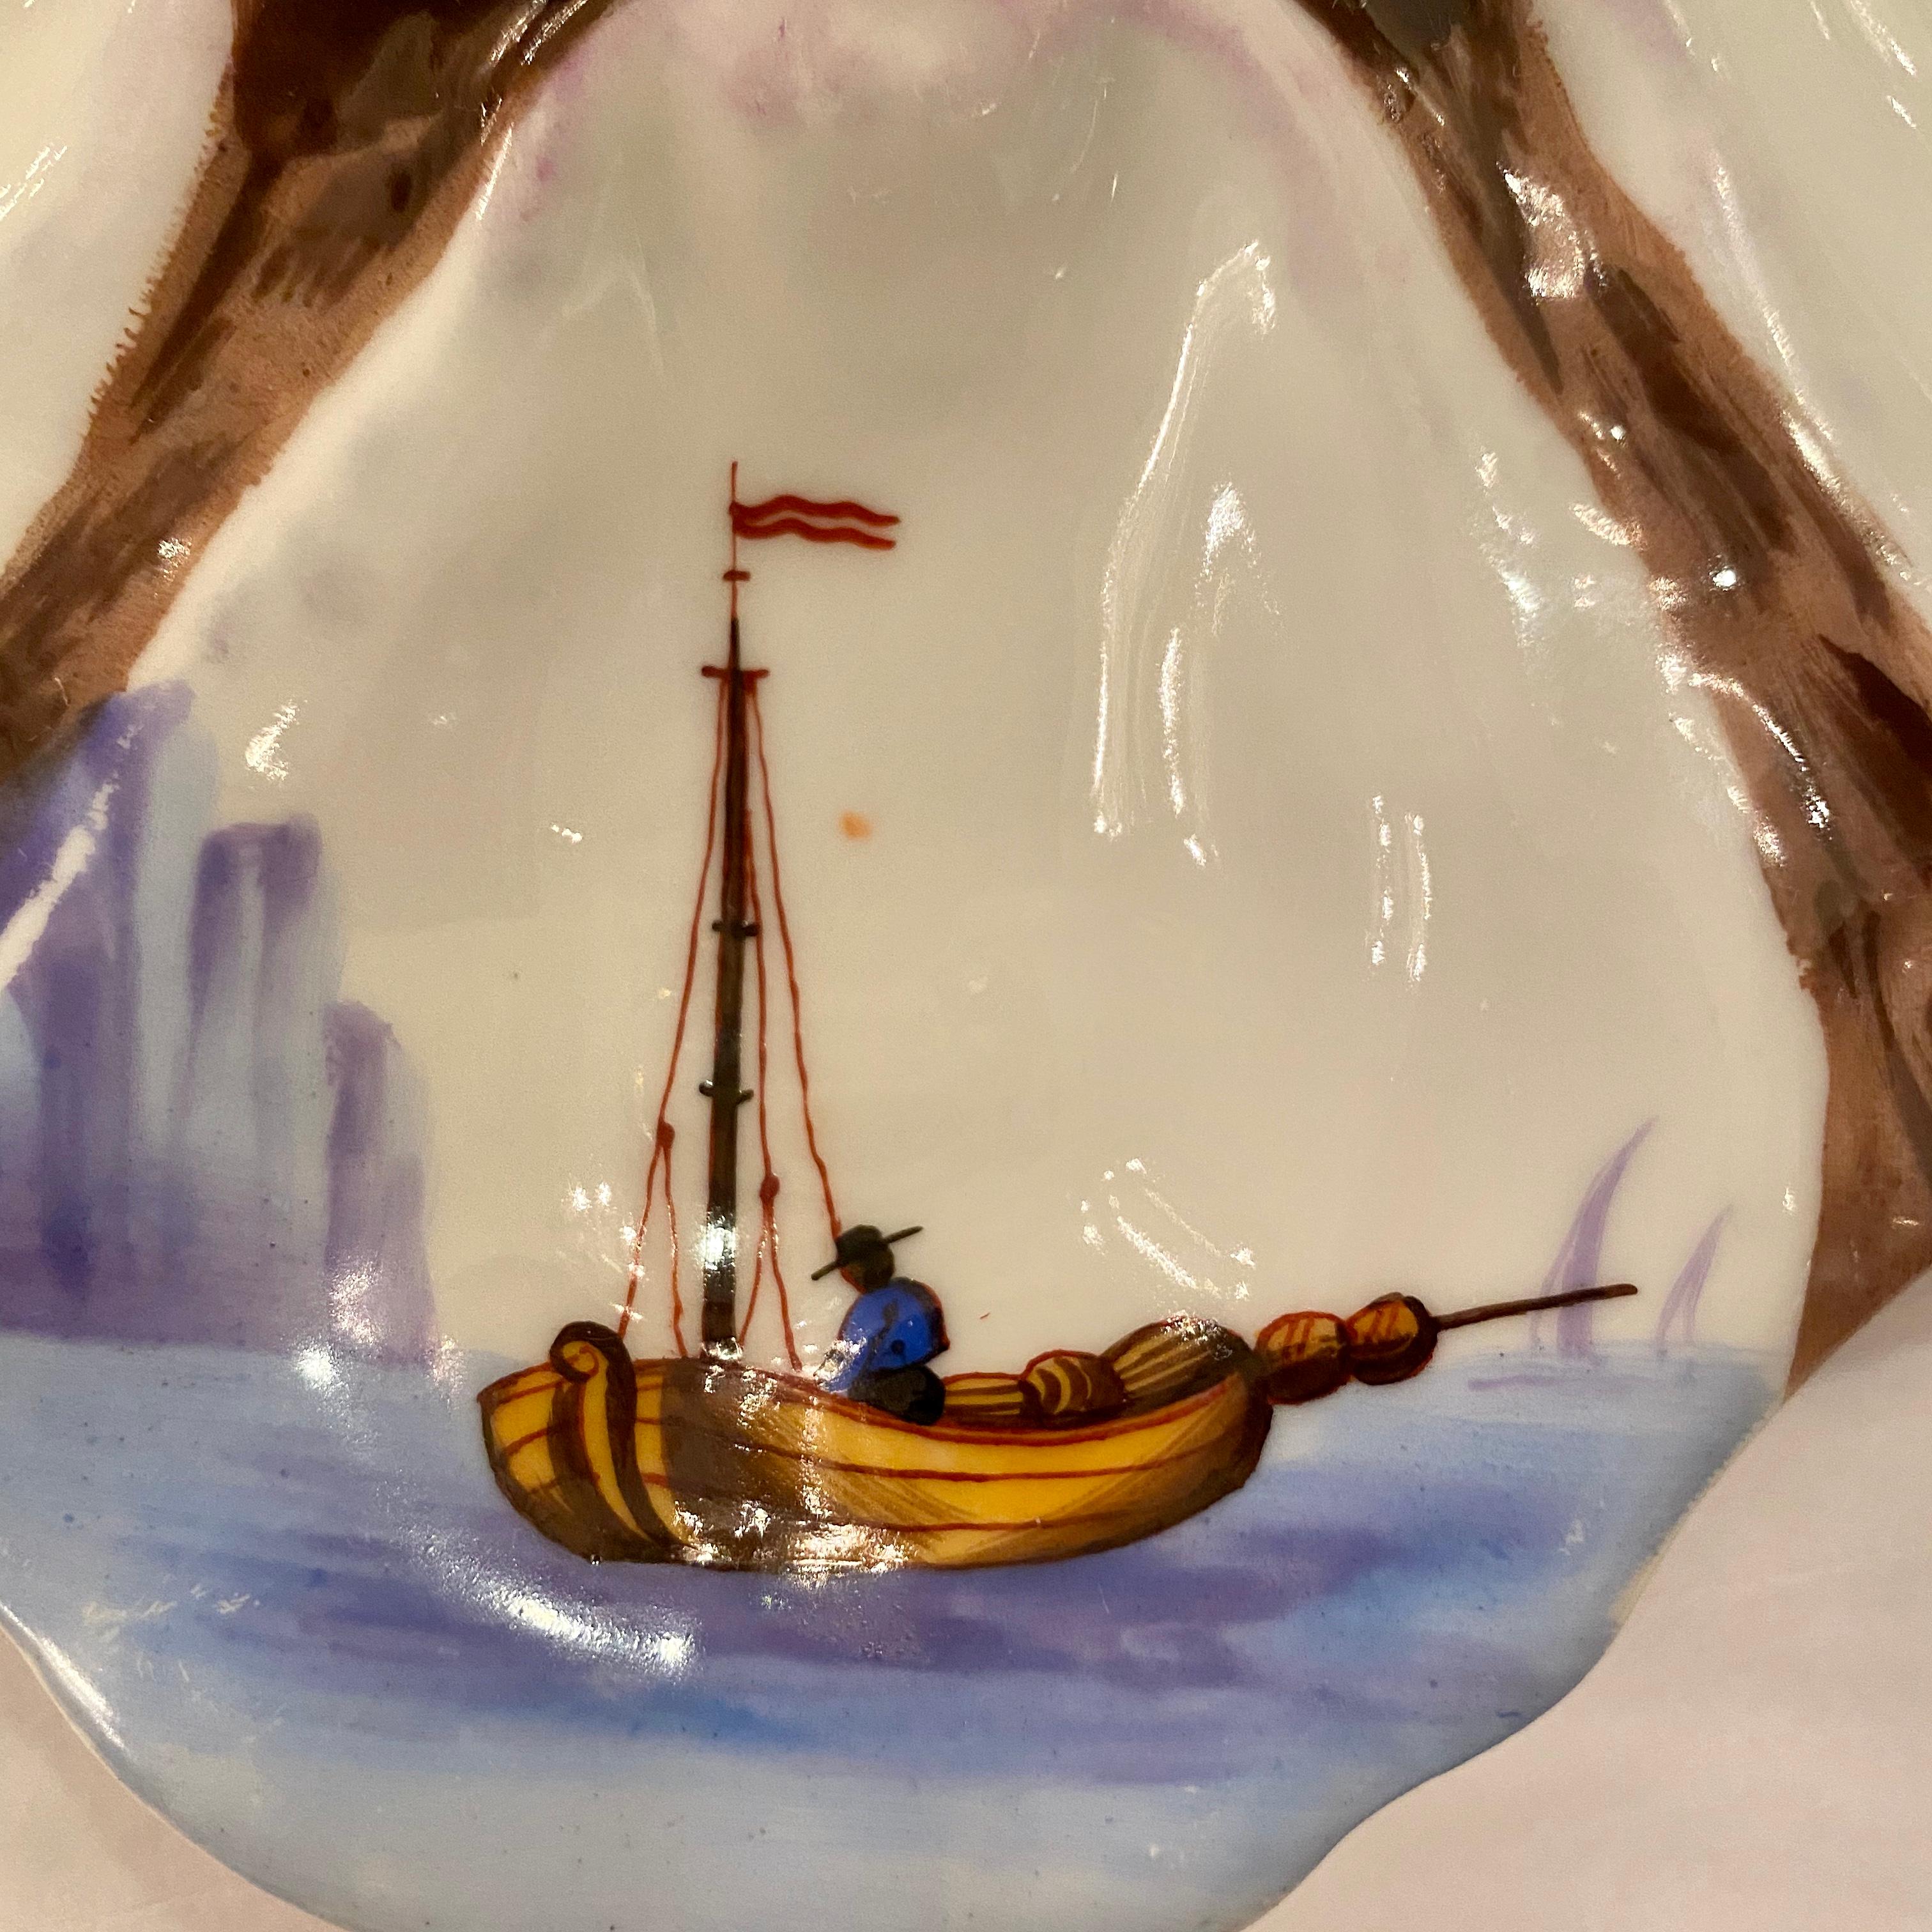 19th Century French Limoges Porcelain Oyster Plate, Hand Painted Sailboats, circa 1880s